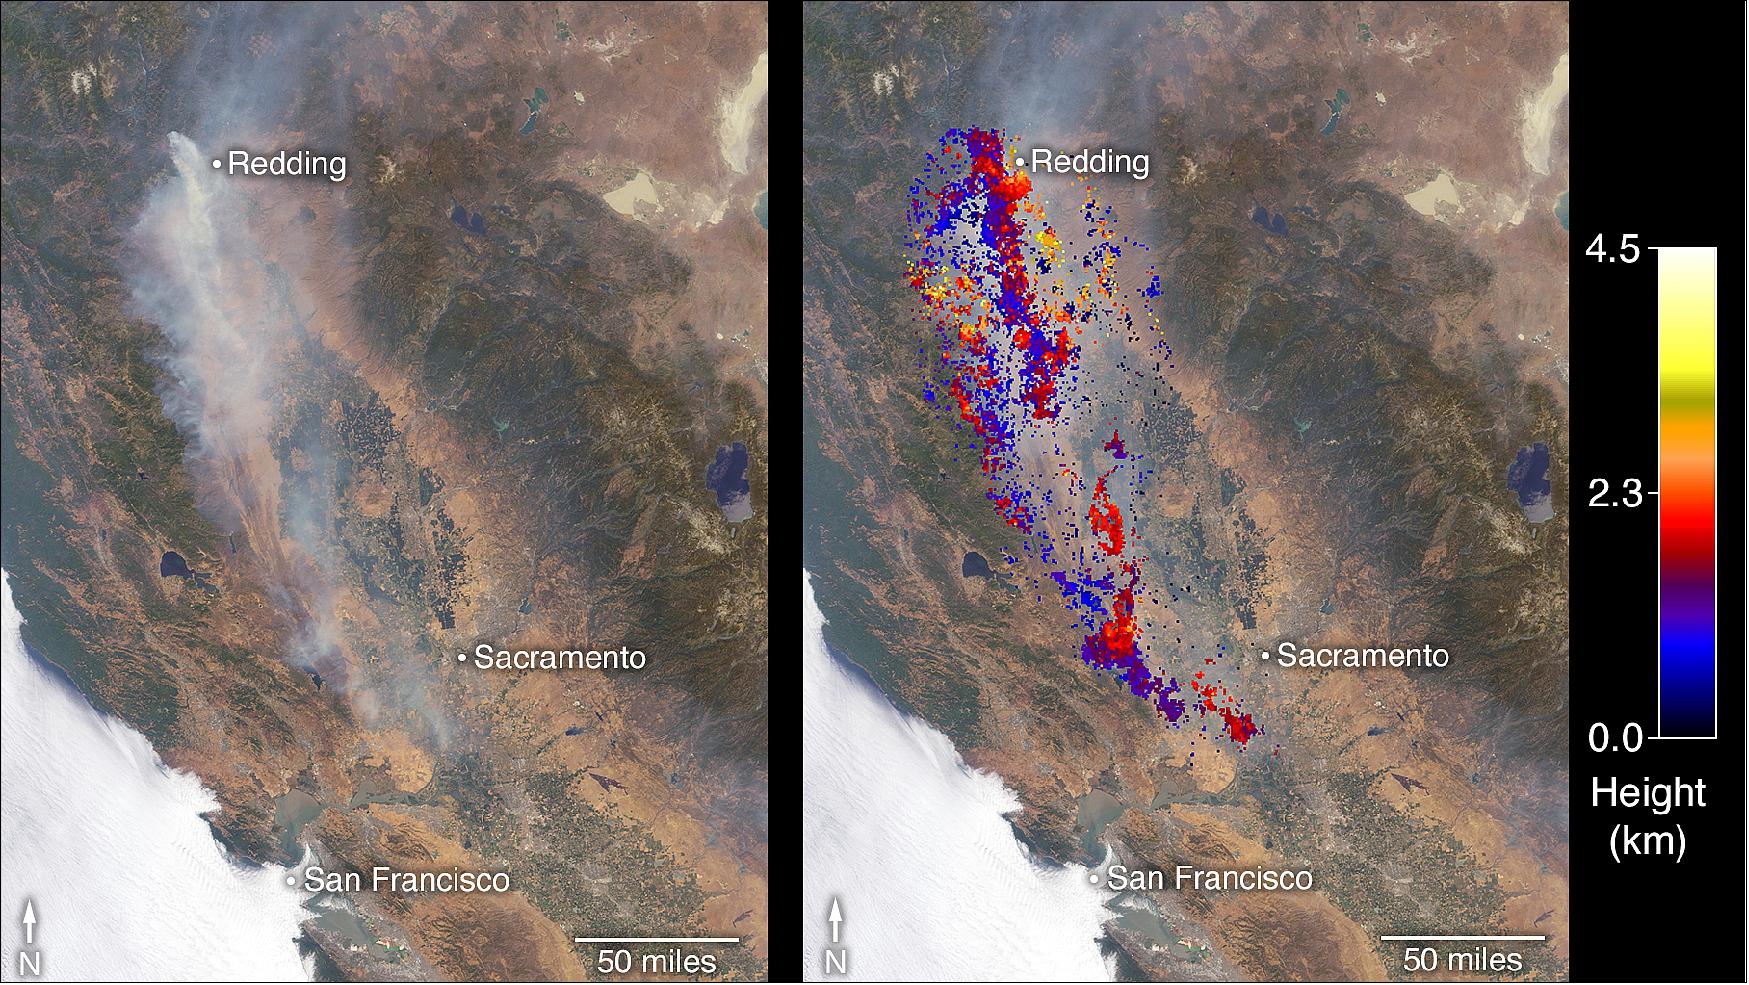 Figure 16: Left: This image shows the Carr Fire near Redding California on July 27 as observed by NASA's MISR instrument. The angular information from MISR's images is used to calculate the height of the smoke plume. The results are superimposed on the image on the right (image credit: NASA)